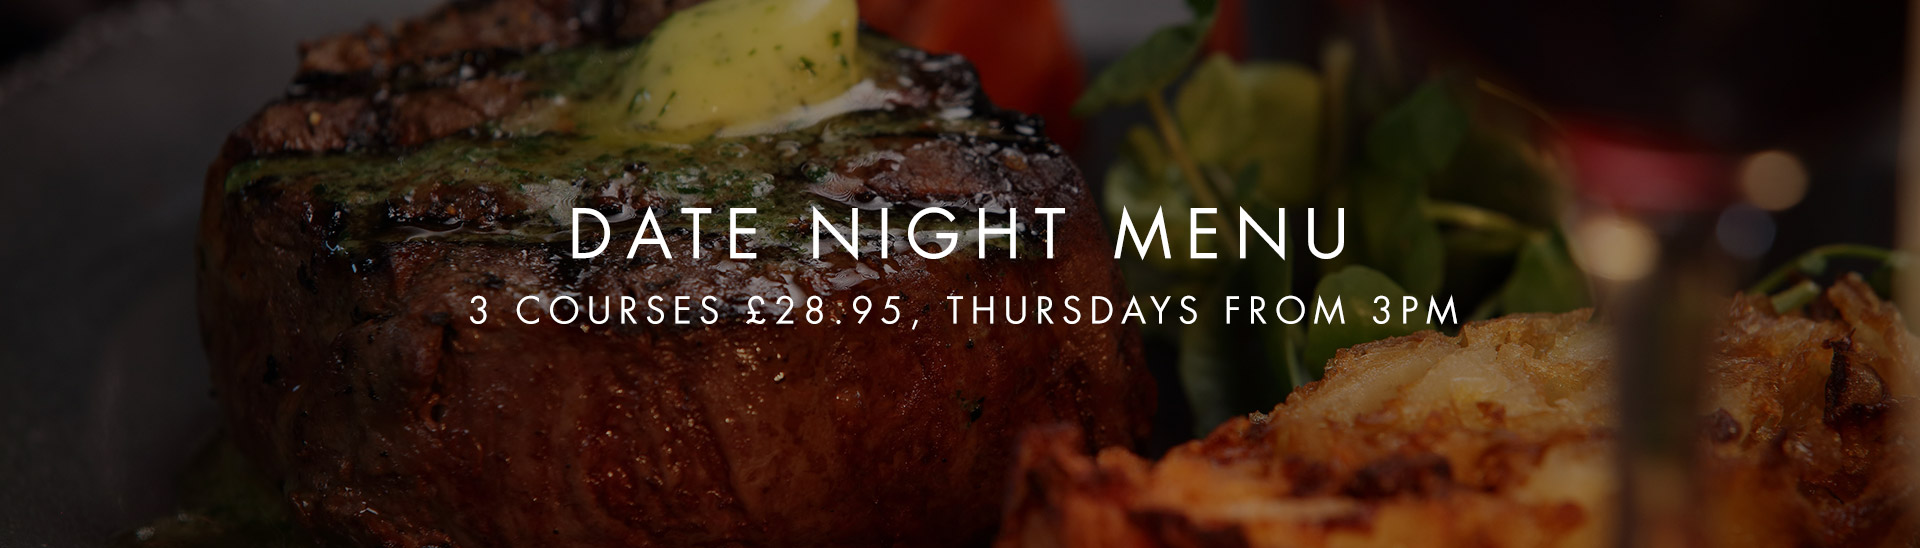 Dates & Steaks at Miller & Carter Wheathampstead